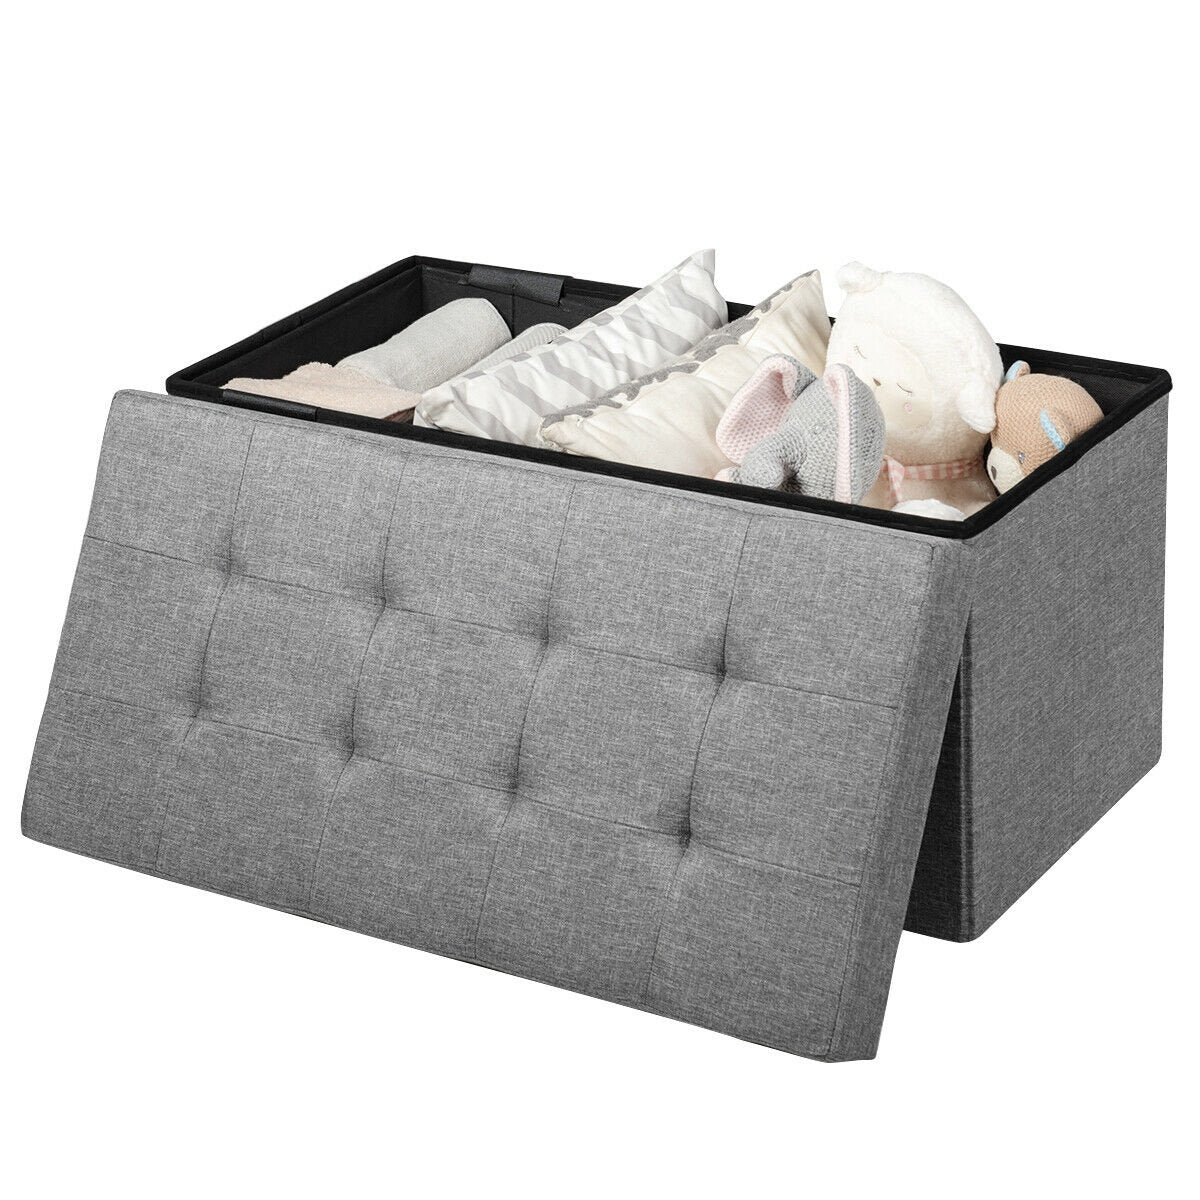 31.5 Inch Fabric Foldable Storage with Removable Storage Bin, Light Gray